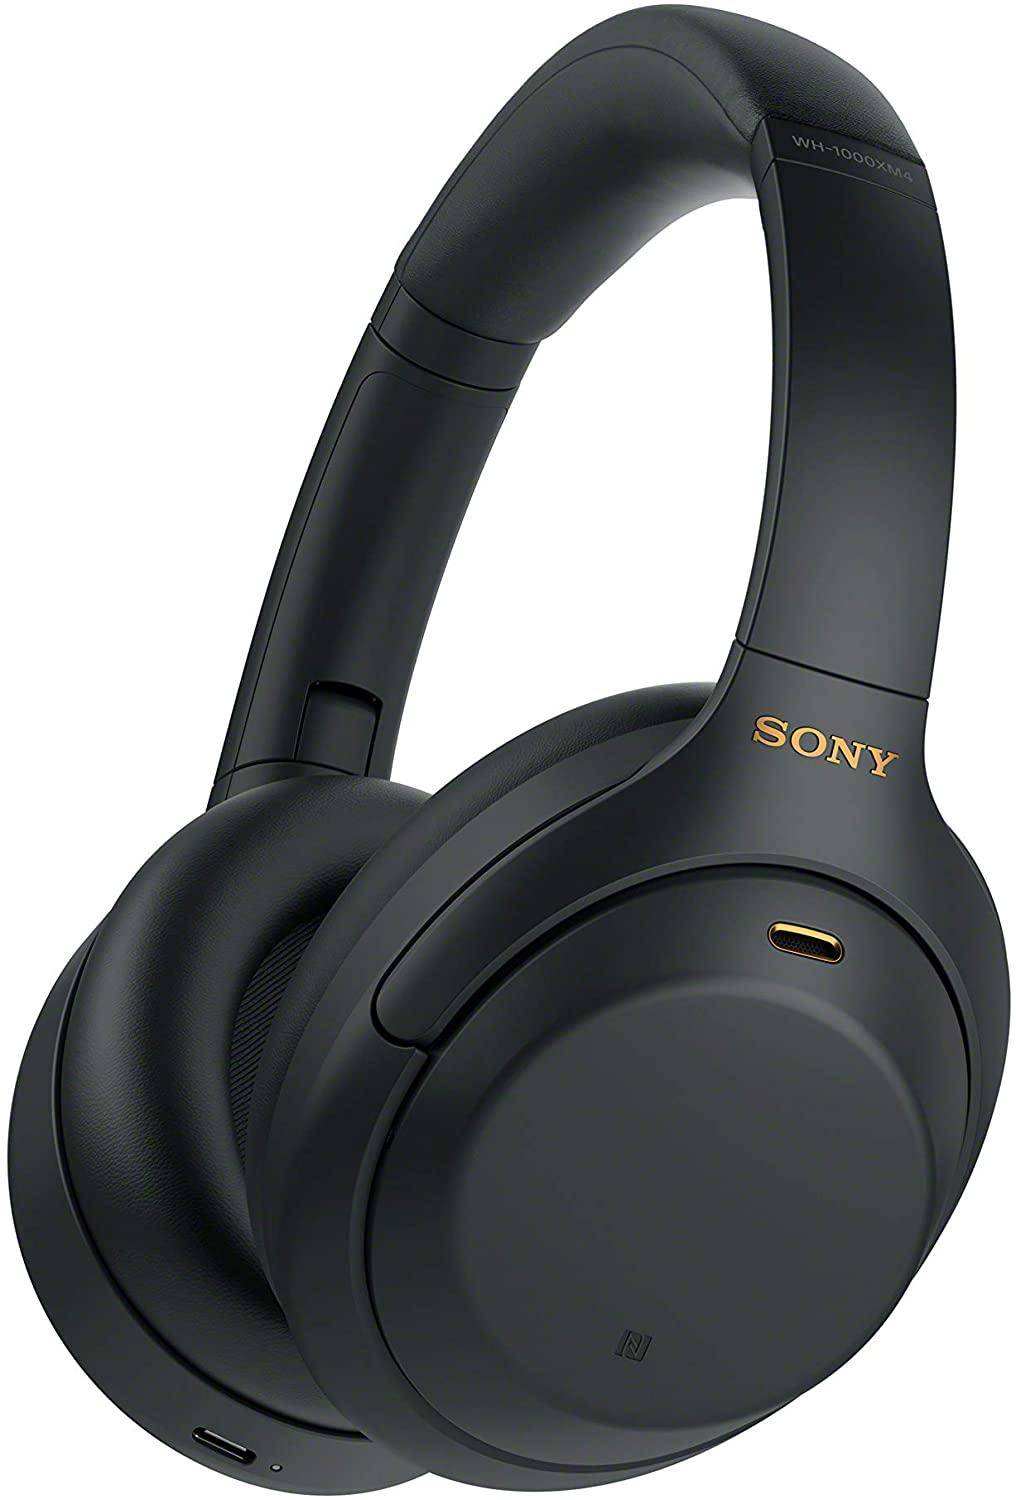 Sony WH-1000XM4 Active Noise Cancelling Headphones zoom image